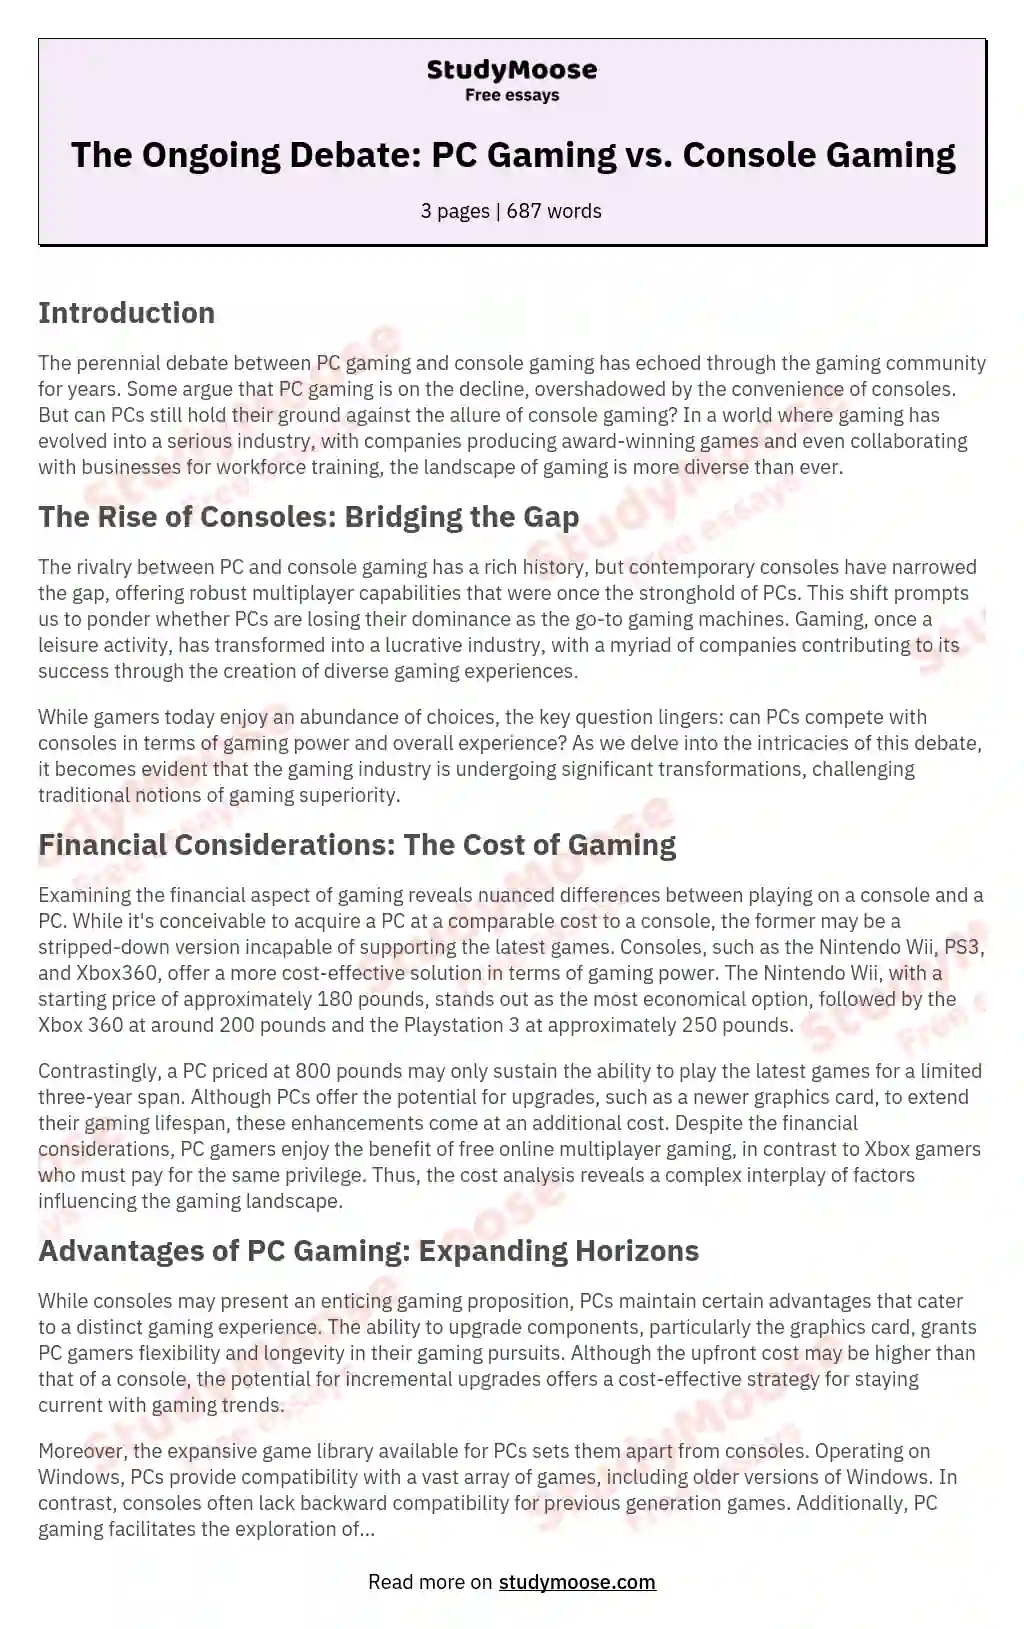 The Ongoing Debate: PC Gaming vs. Console Gaming essay